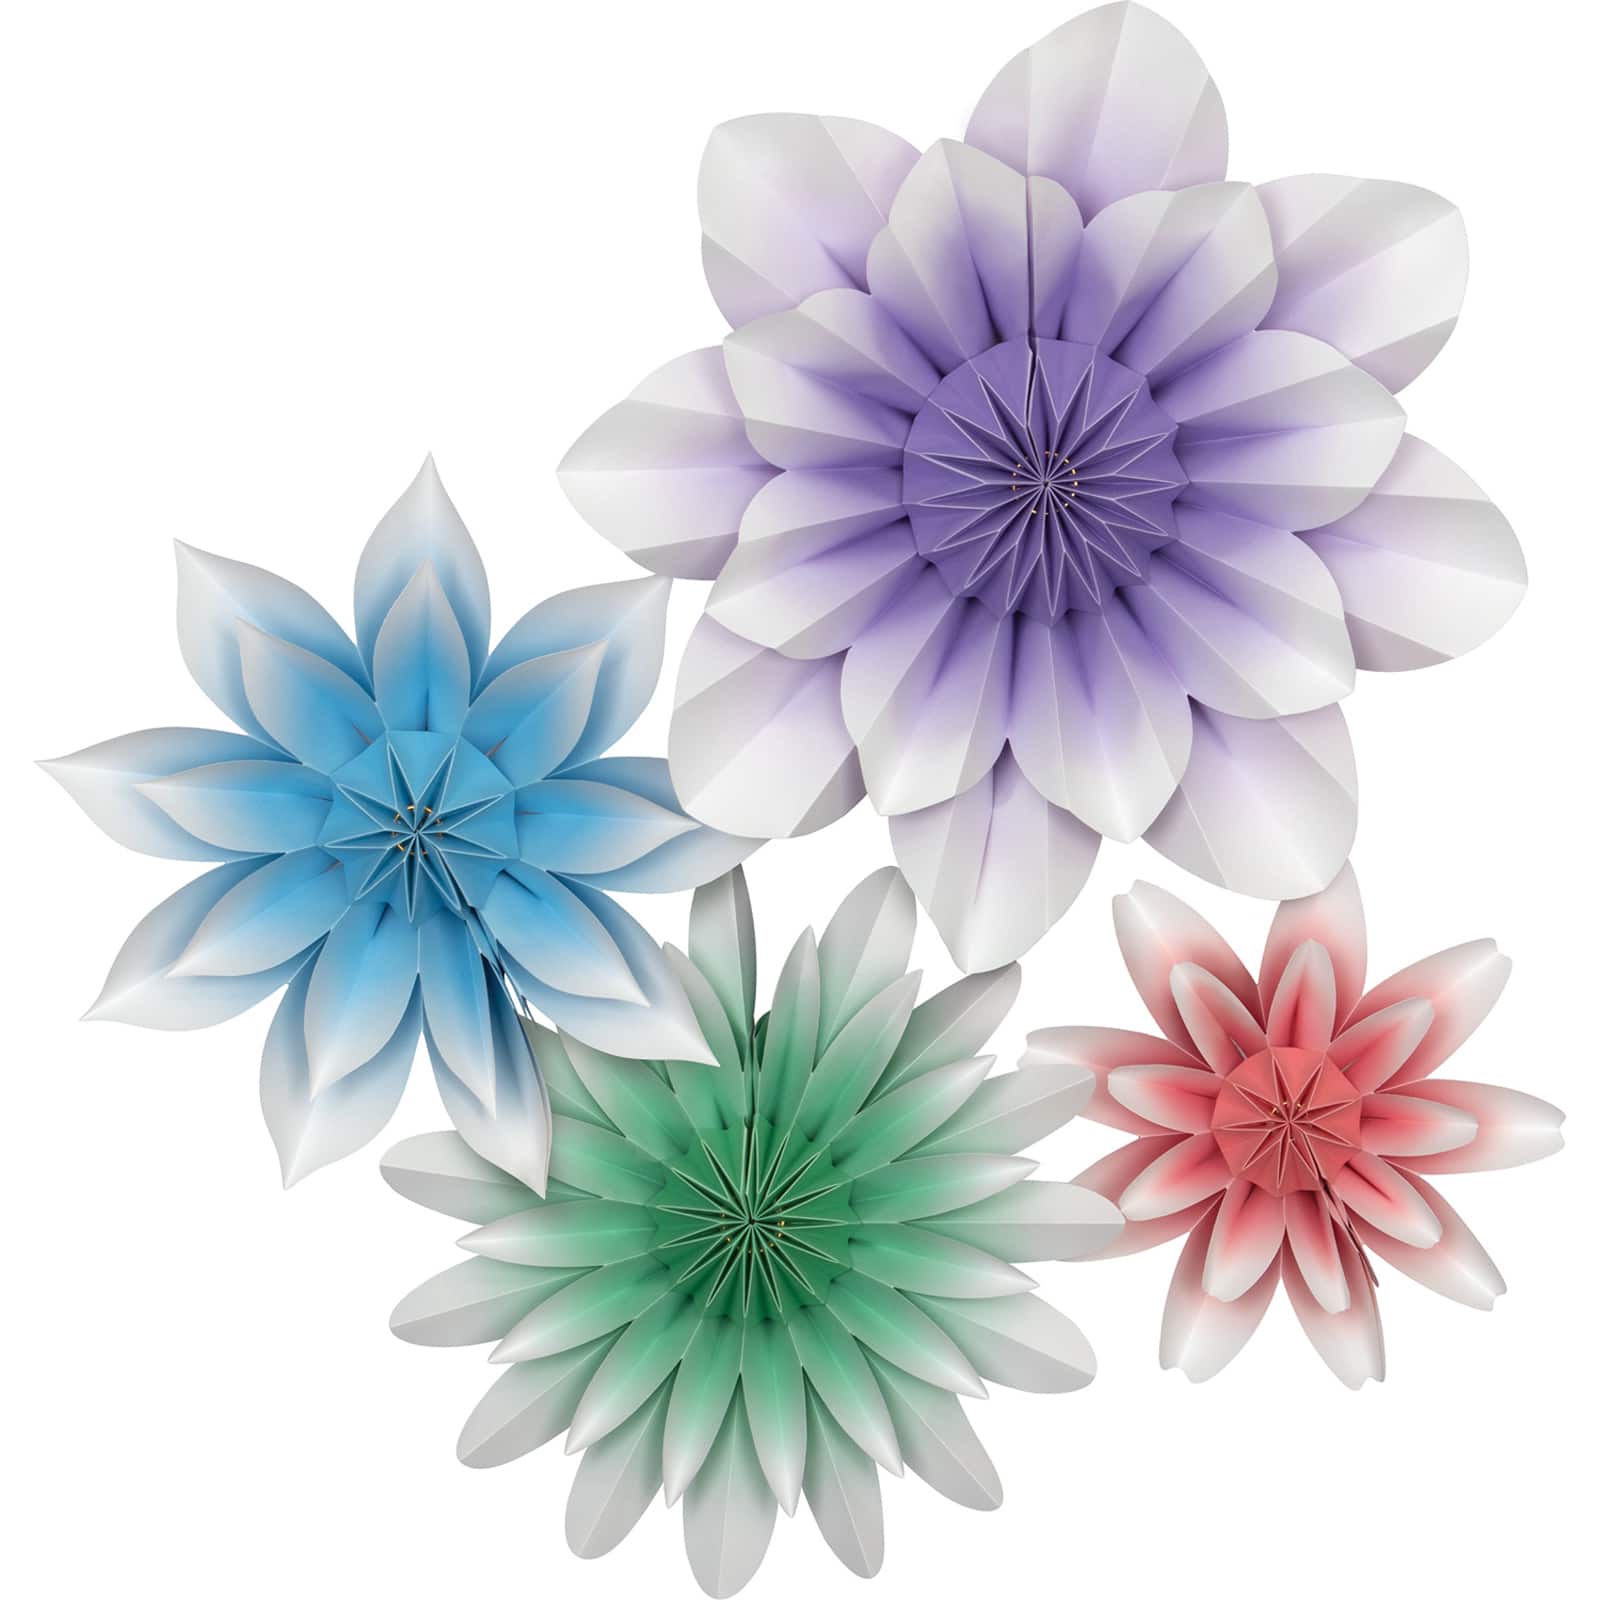 Teacher Created Resources Assorted Blossoms Paper Flowers, 4ct.